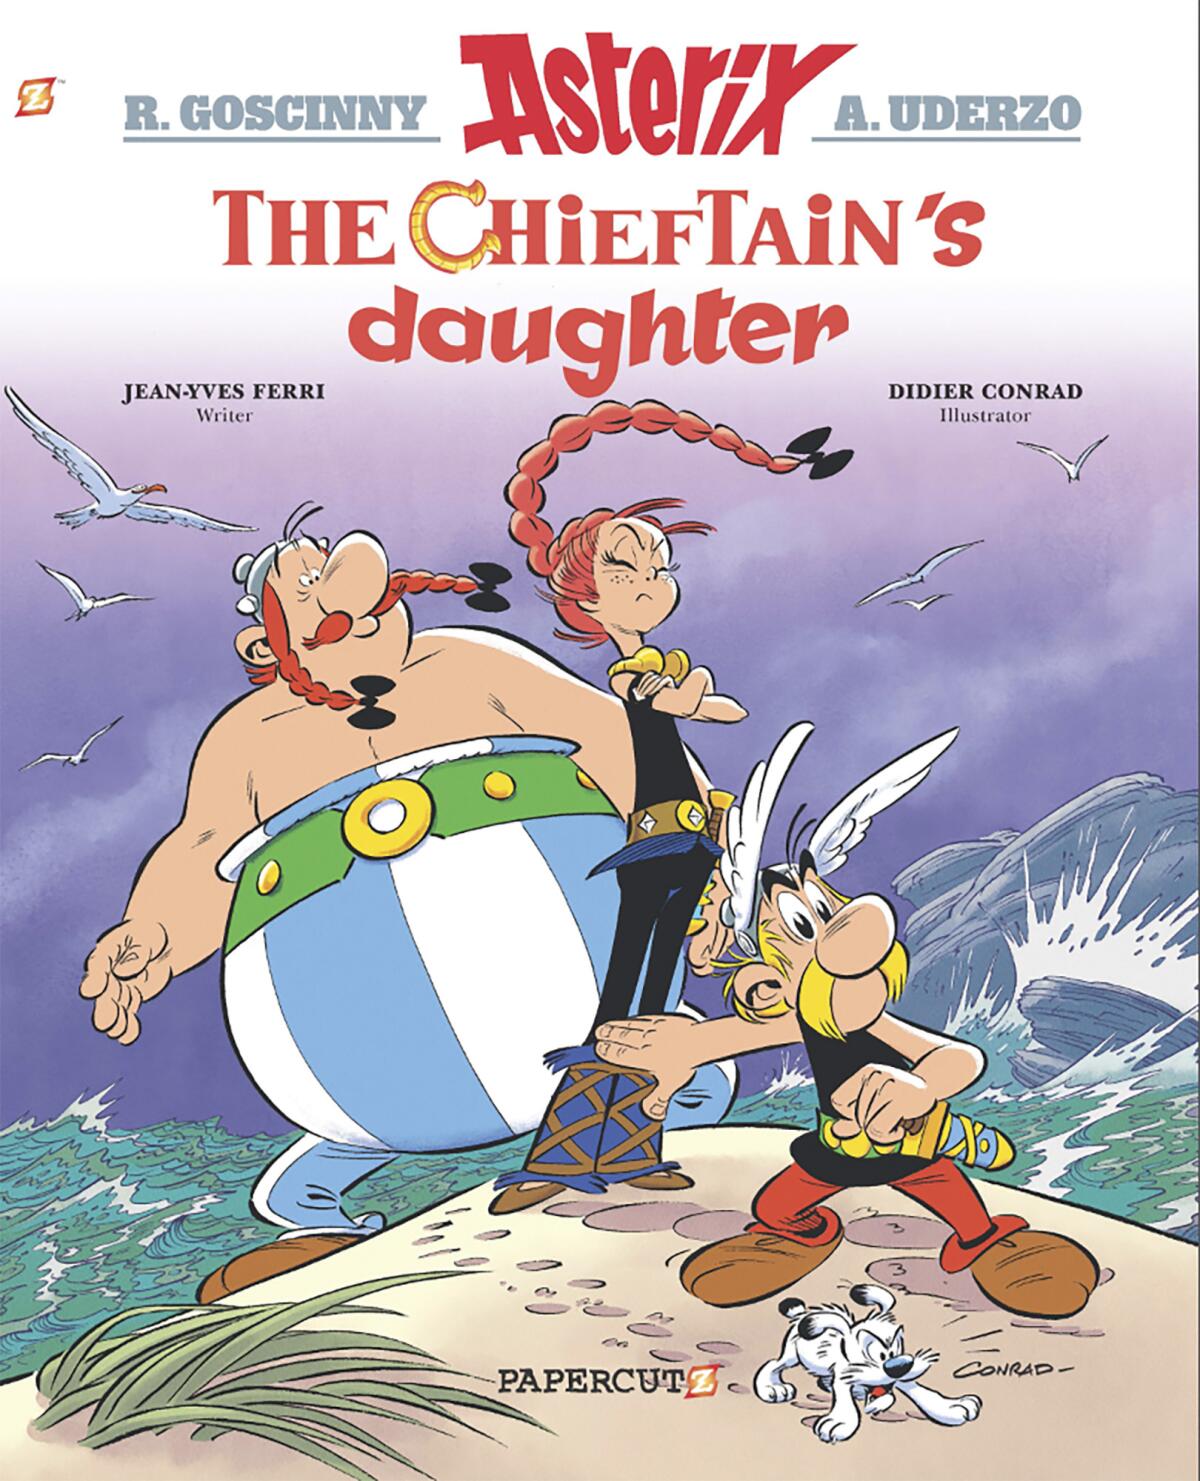 This image released by Papercutz shows the cover image for “The Chieftain's Daughter,” the latest in the Asterix collection. Papercutz, which specializes in graphic novels for all ages, is republishing “Asterix” collections this summer with a new English translations — one specifically geared to American readers. Created by comic-strip artist Alberto Uderzo and writer Rene Goscinny in 1959, “Asterix” books have been translated into 111 languages, sold some 380 million albums worldwide and spawned multiple films. (Papercutz via AP)